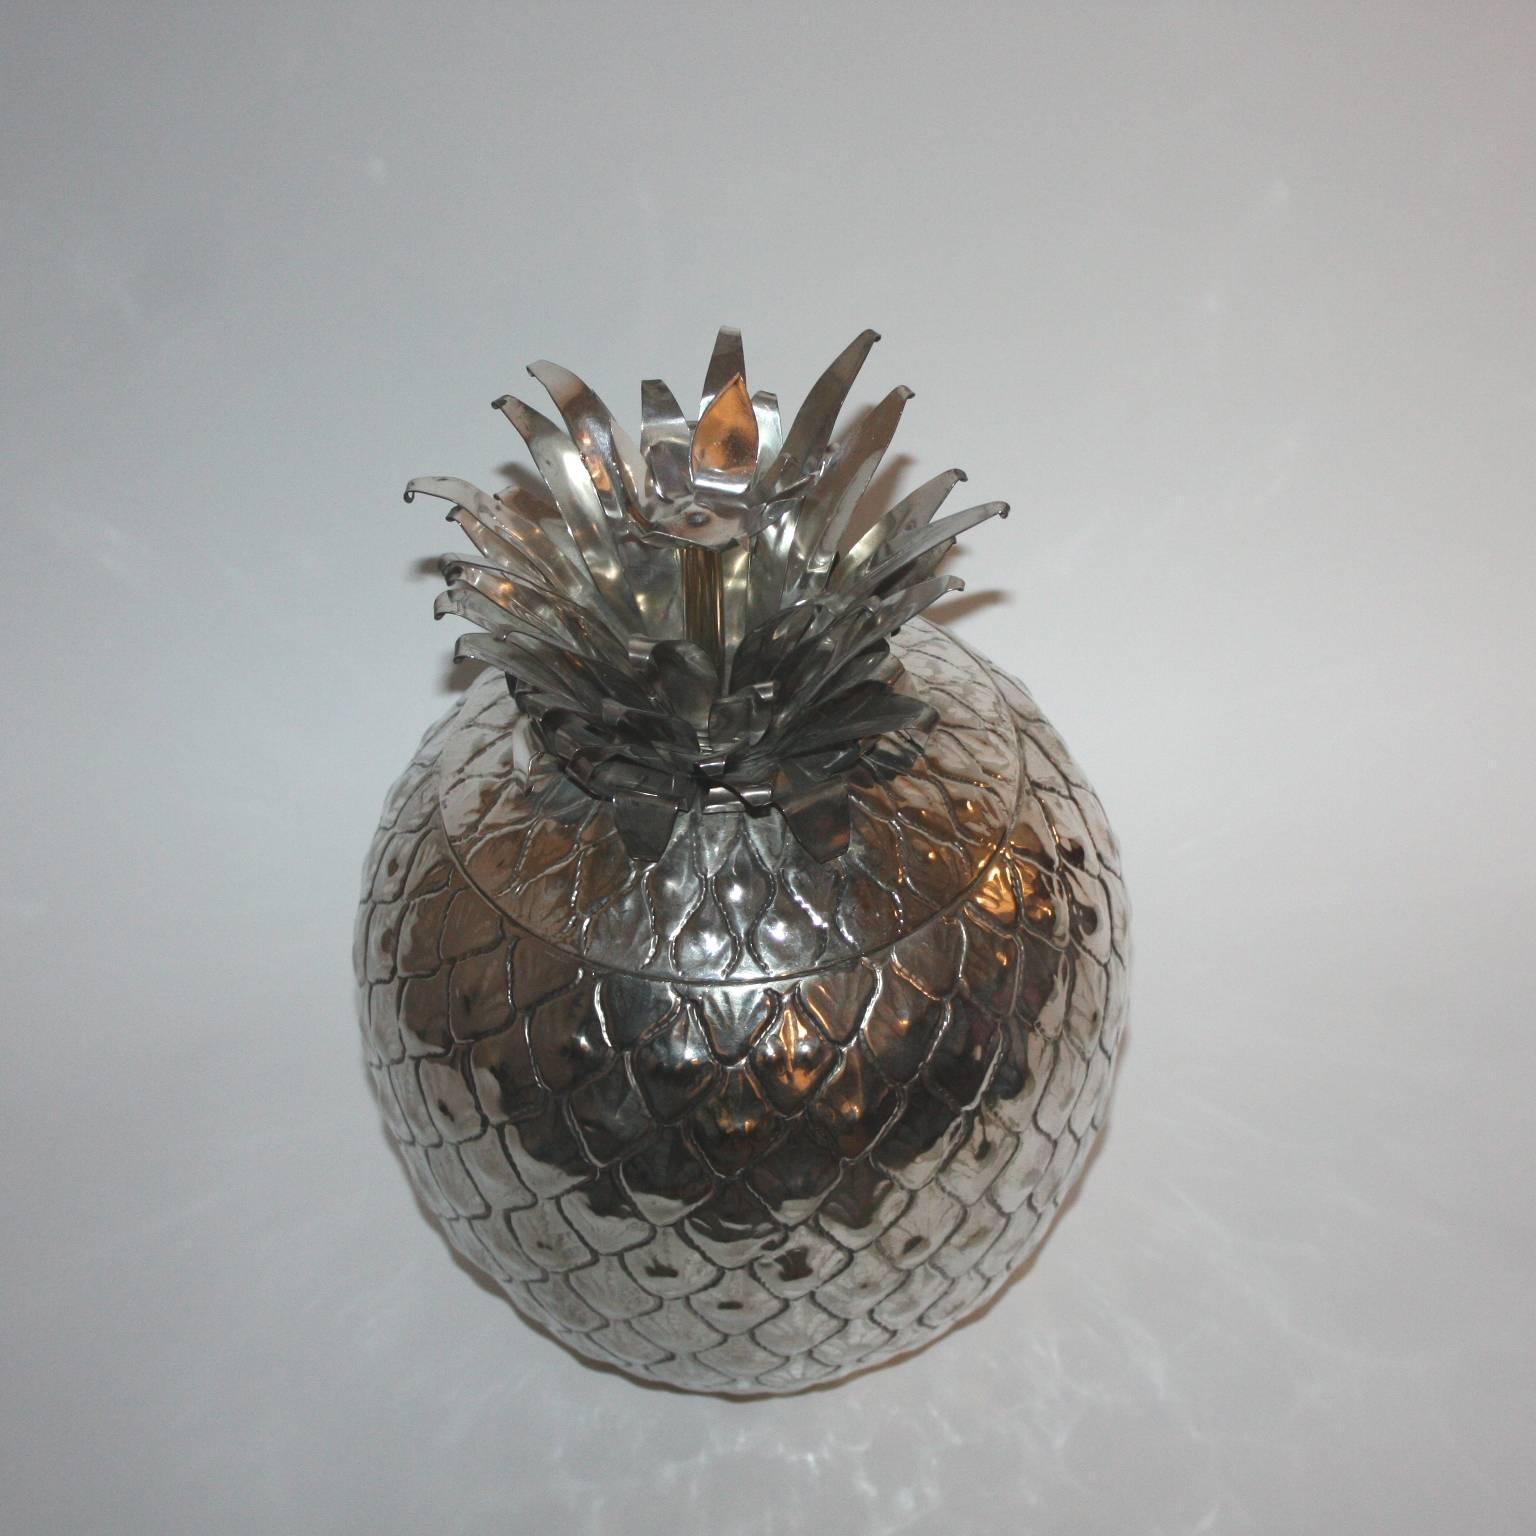 Silvered metal large ice bucket in the shape of pineapple in the style of Mauro Manetti, Italian, 1960s.